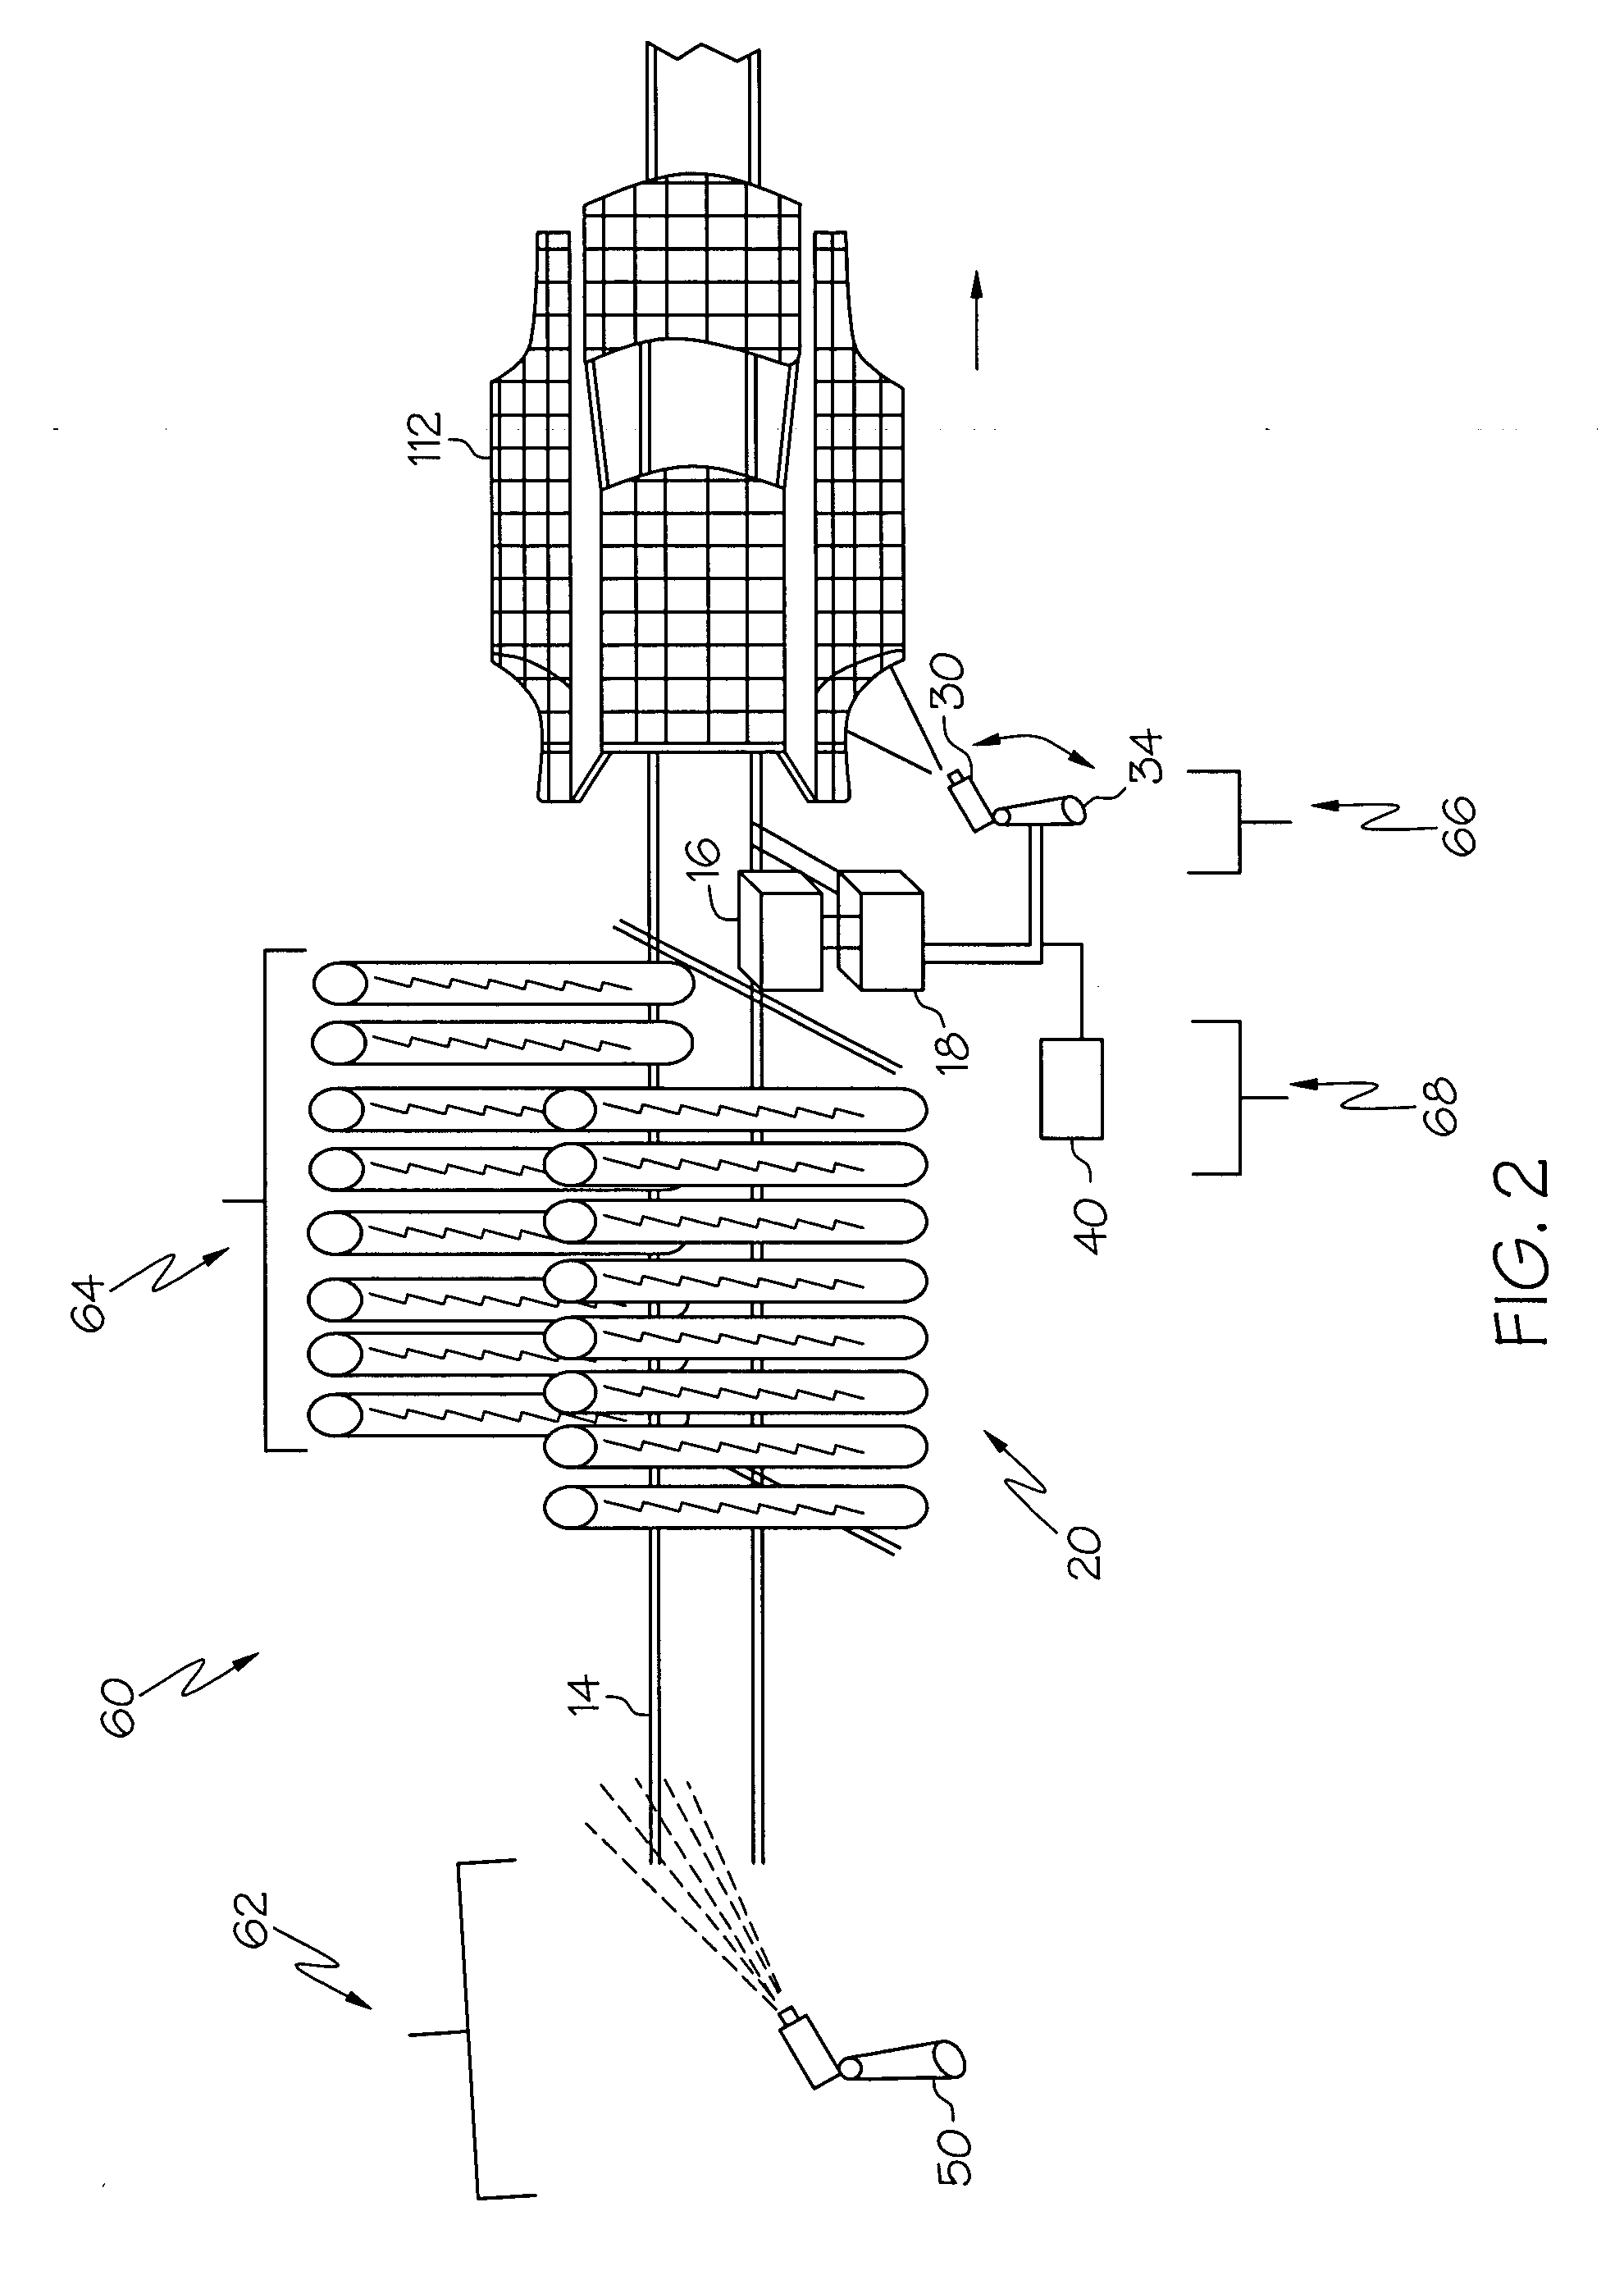 Systems and methods for inspecting coatings, surfaces and interfaces